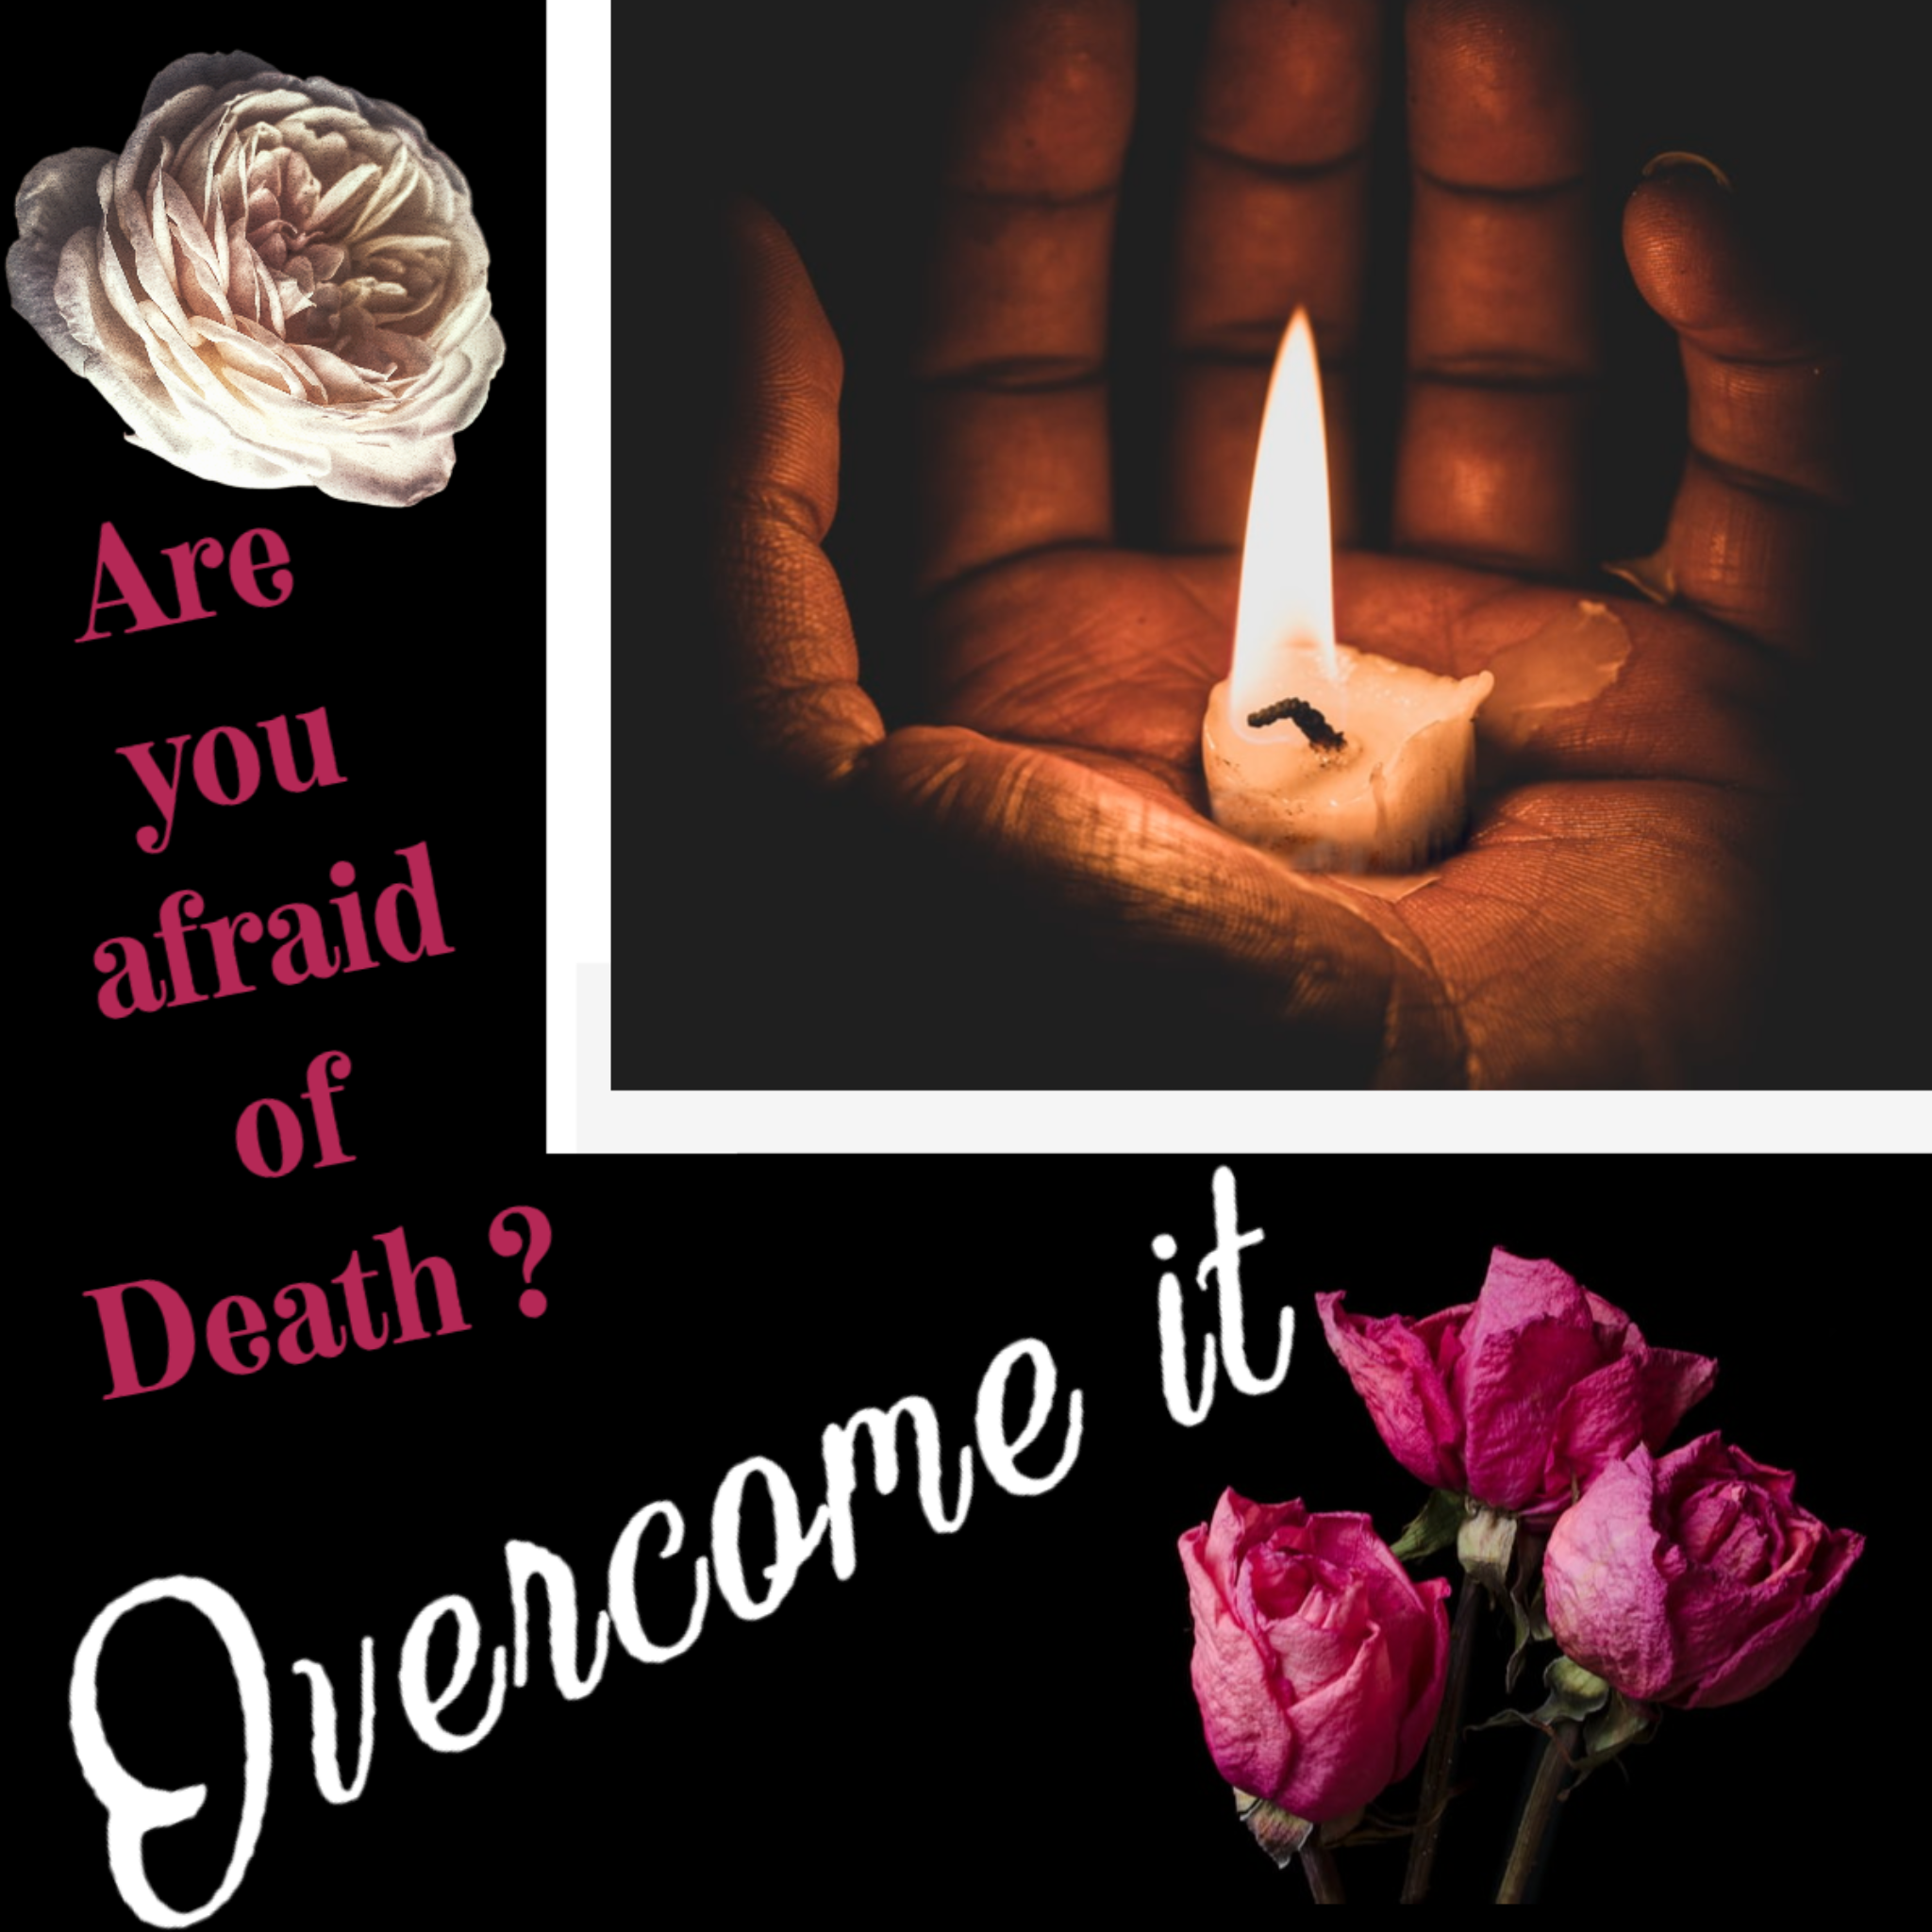 Are you afraid of death_overcome it